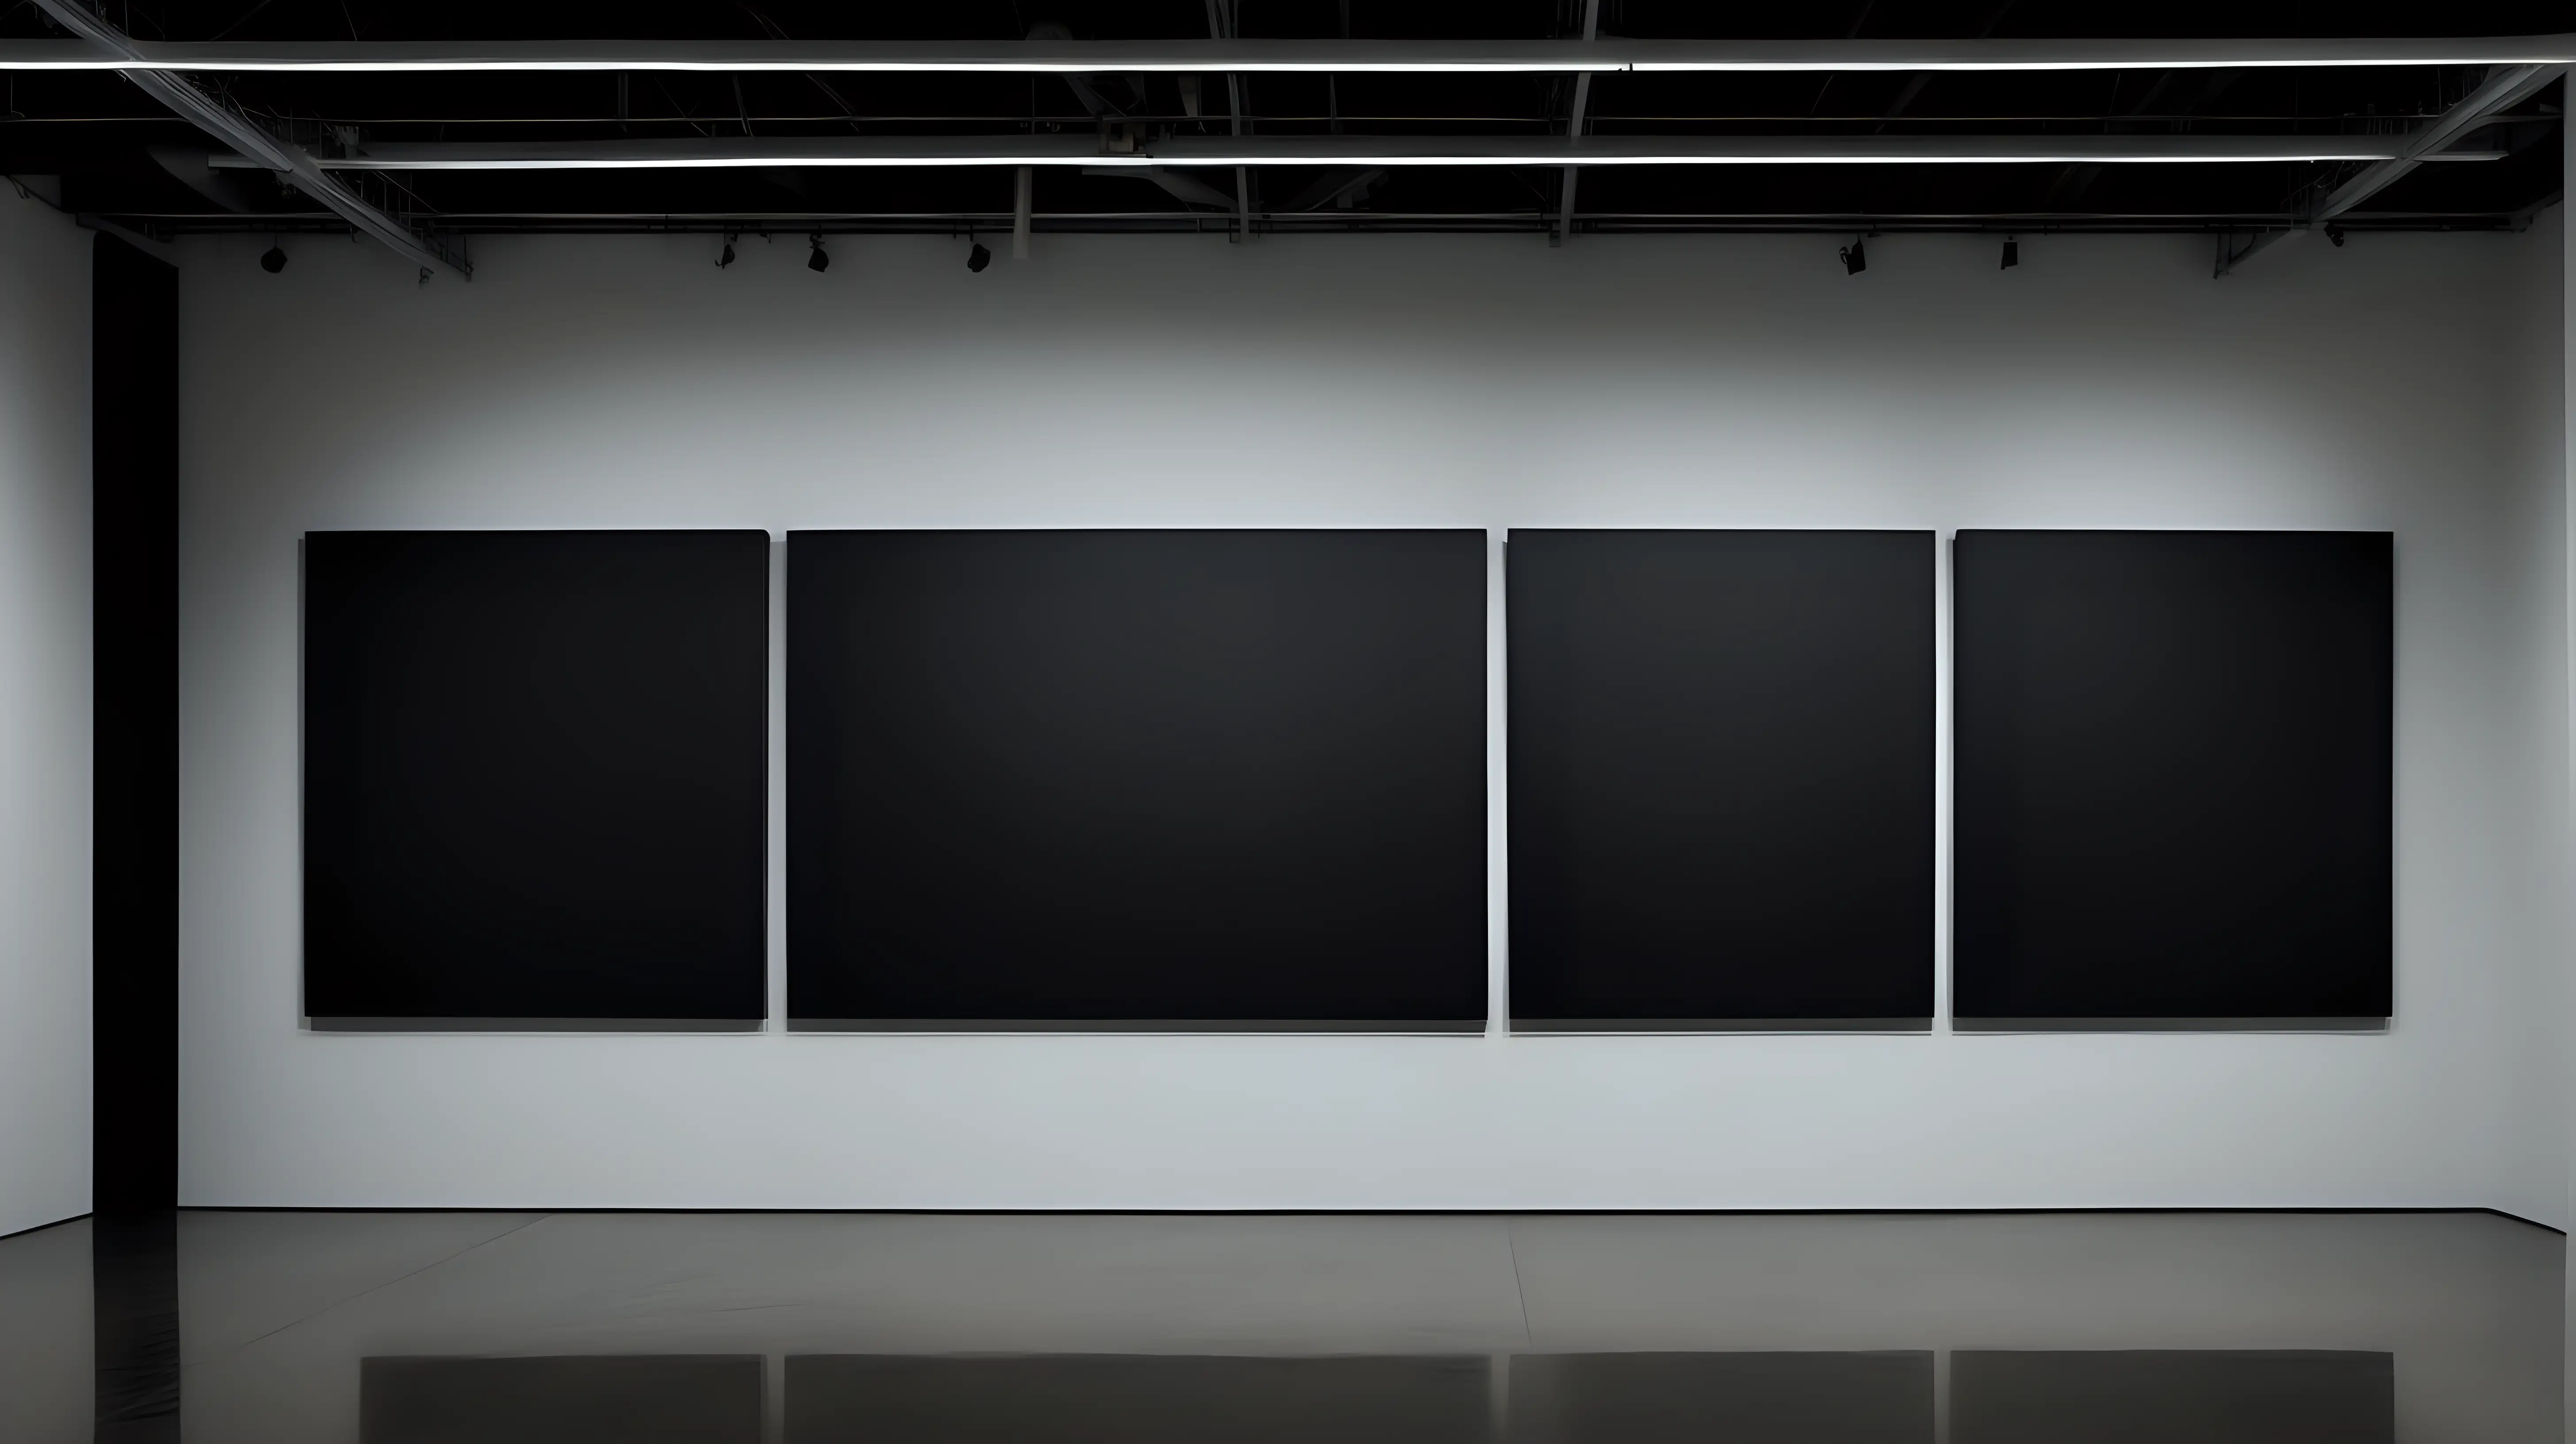 Contemporary Art Museum with Dark Walls and Black Canvases